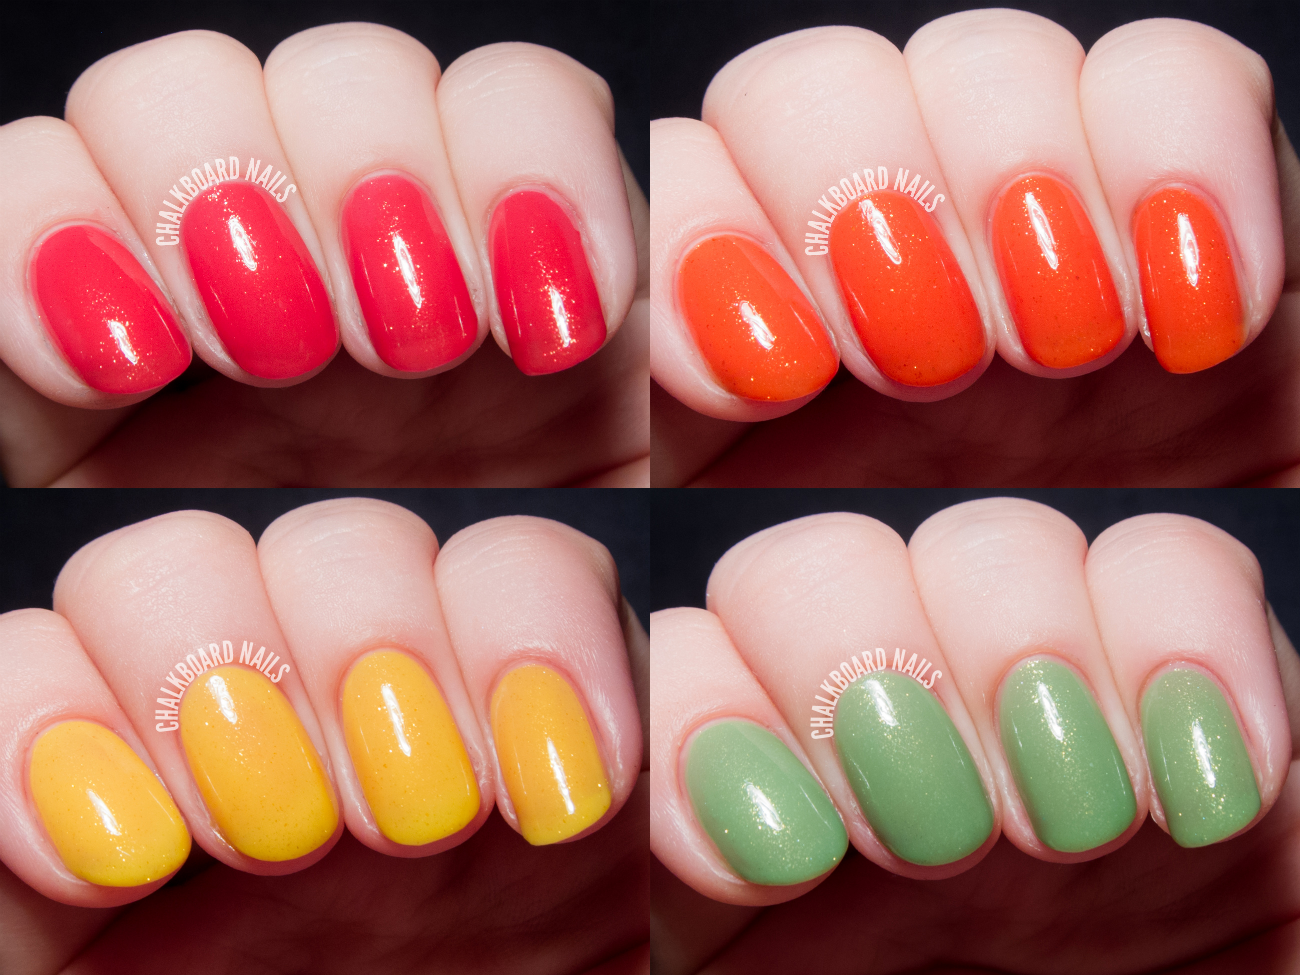 Contrary Polish Polish With A-Peel Collection via @chalkboardnails